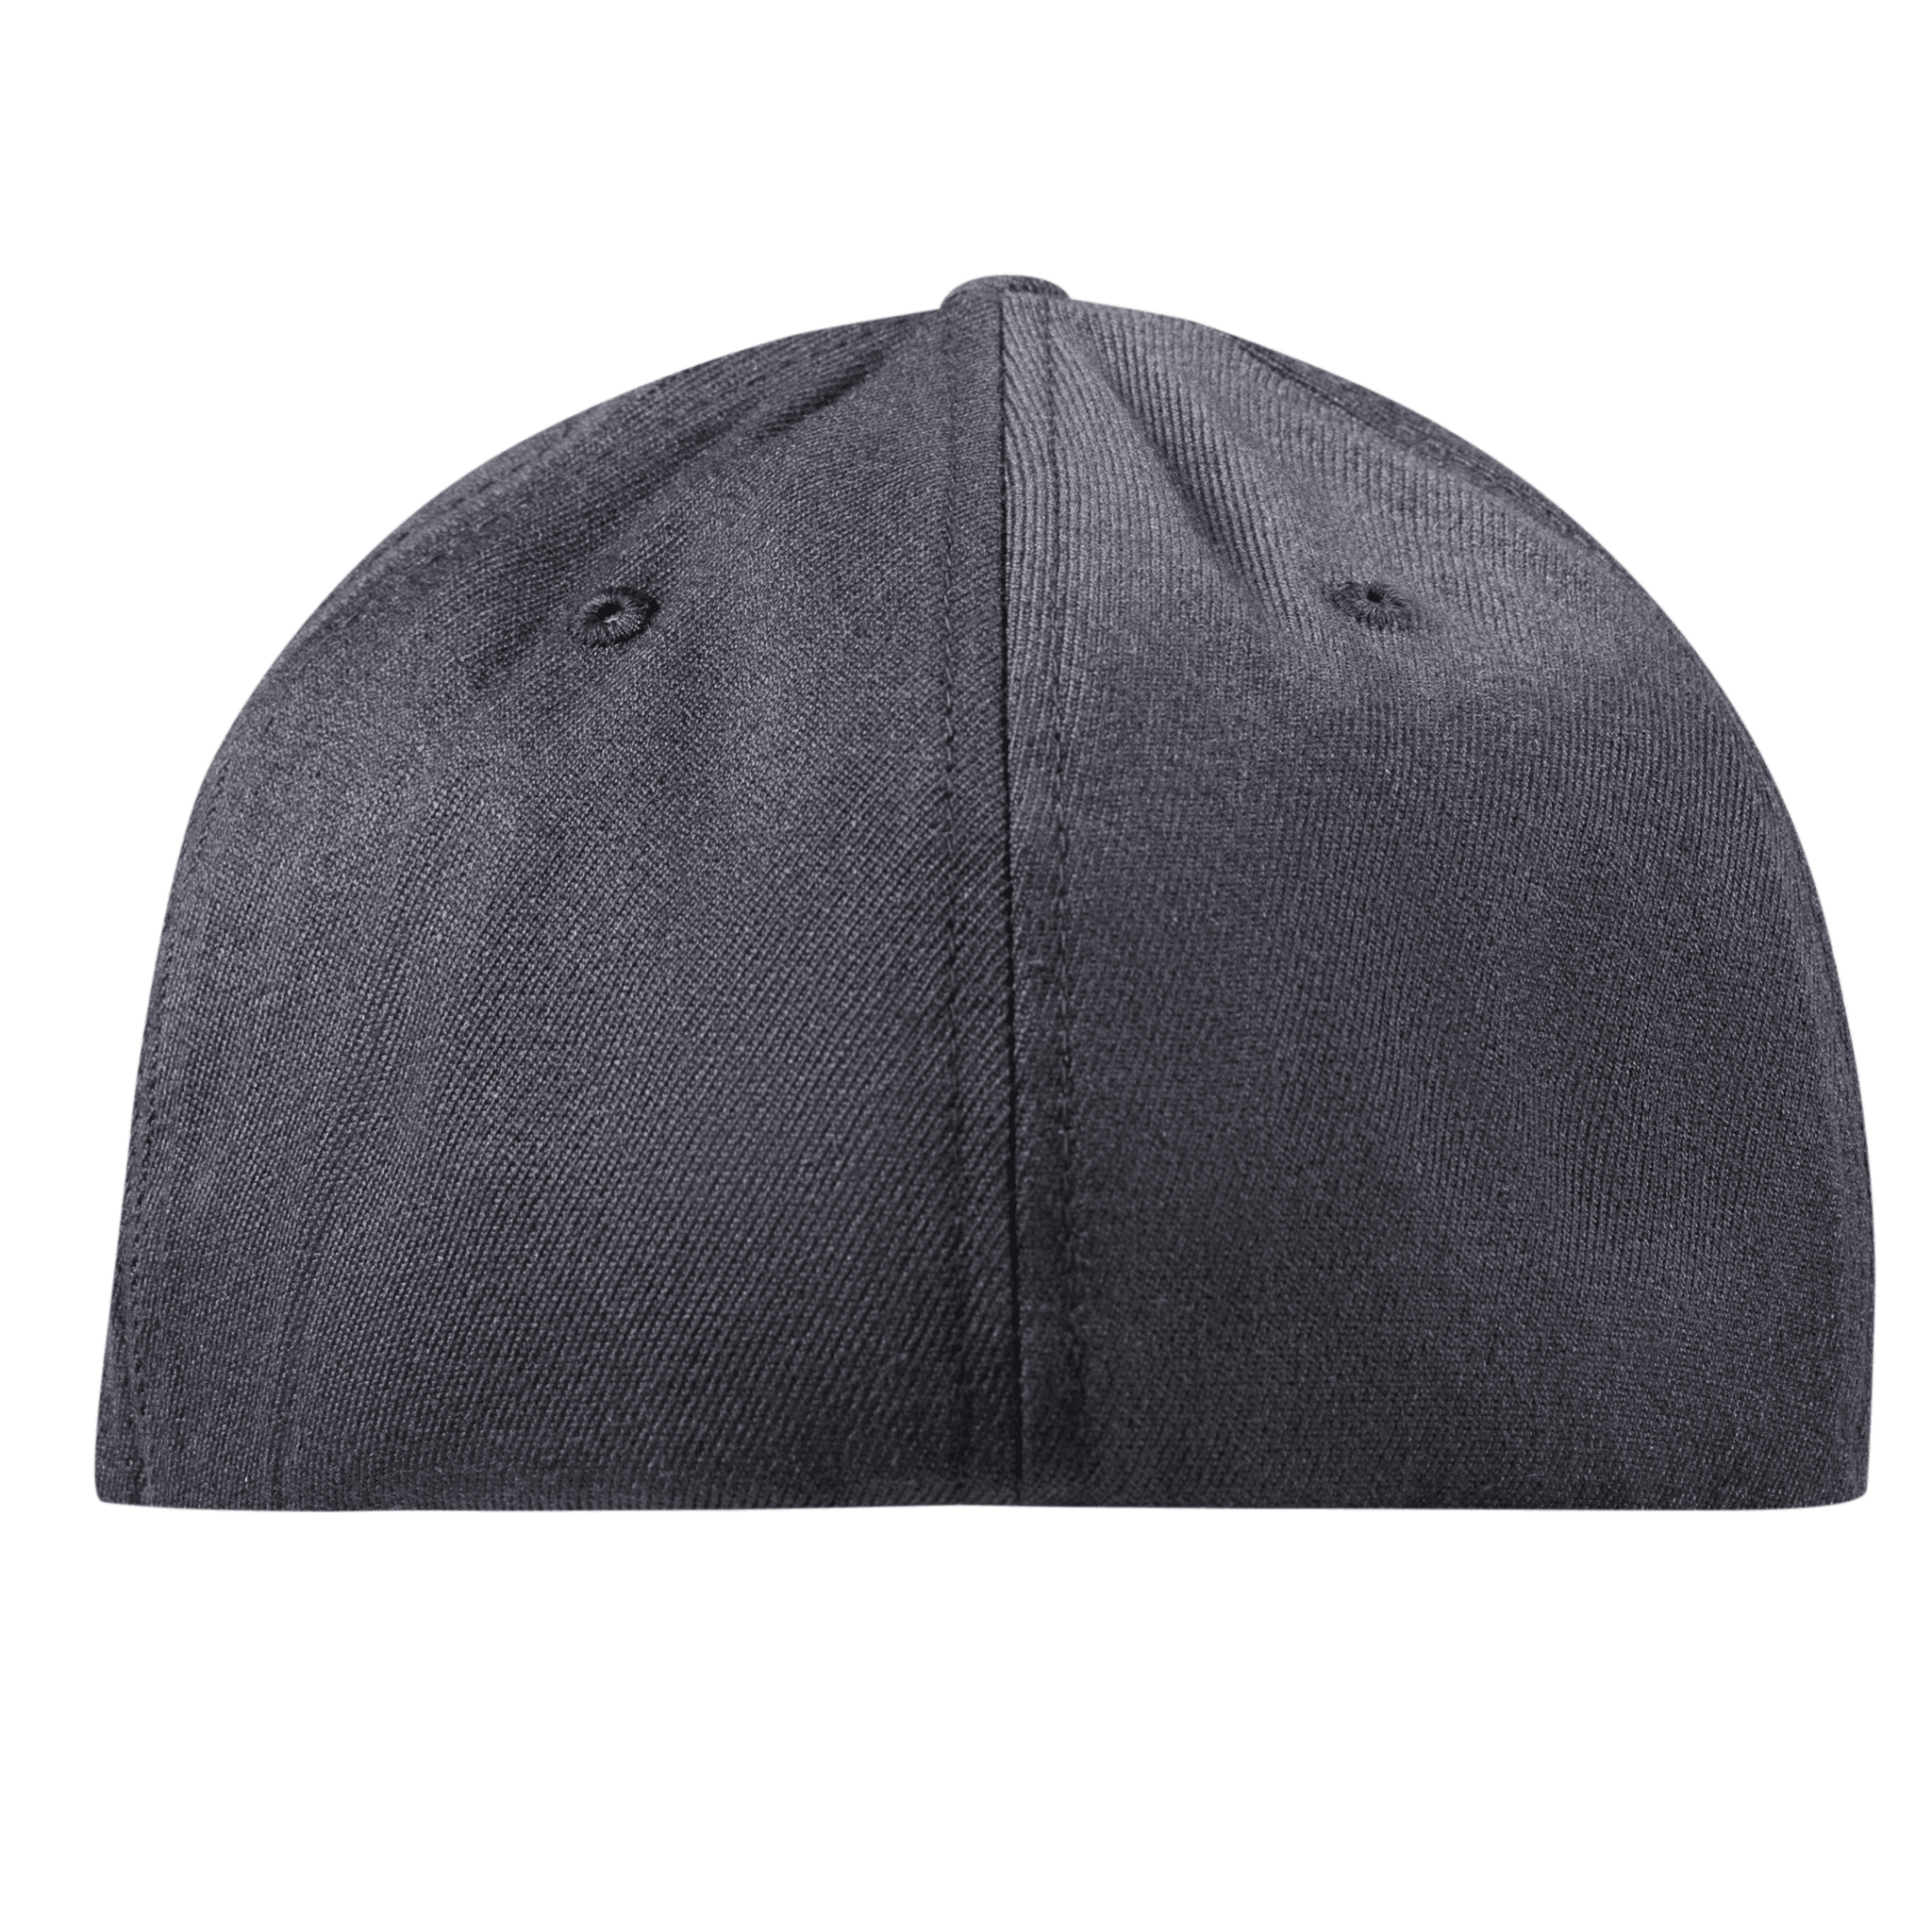 California Vintage Flexfit Fitted Back Charcoal